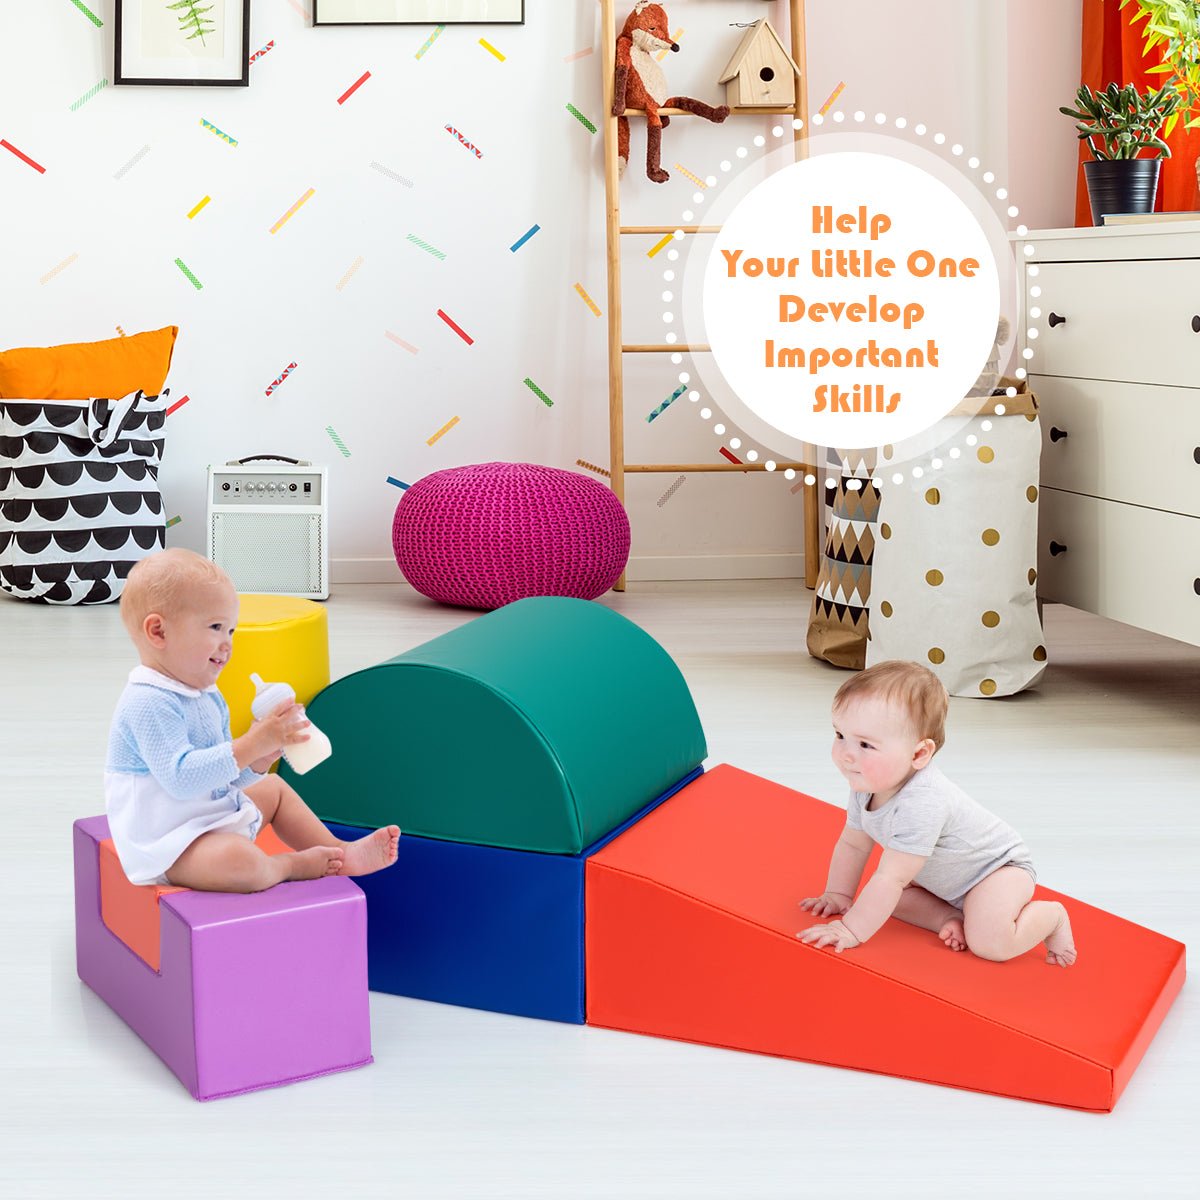 Safe and Exciting Playtime for Little Explorers with Red Blocks